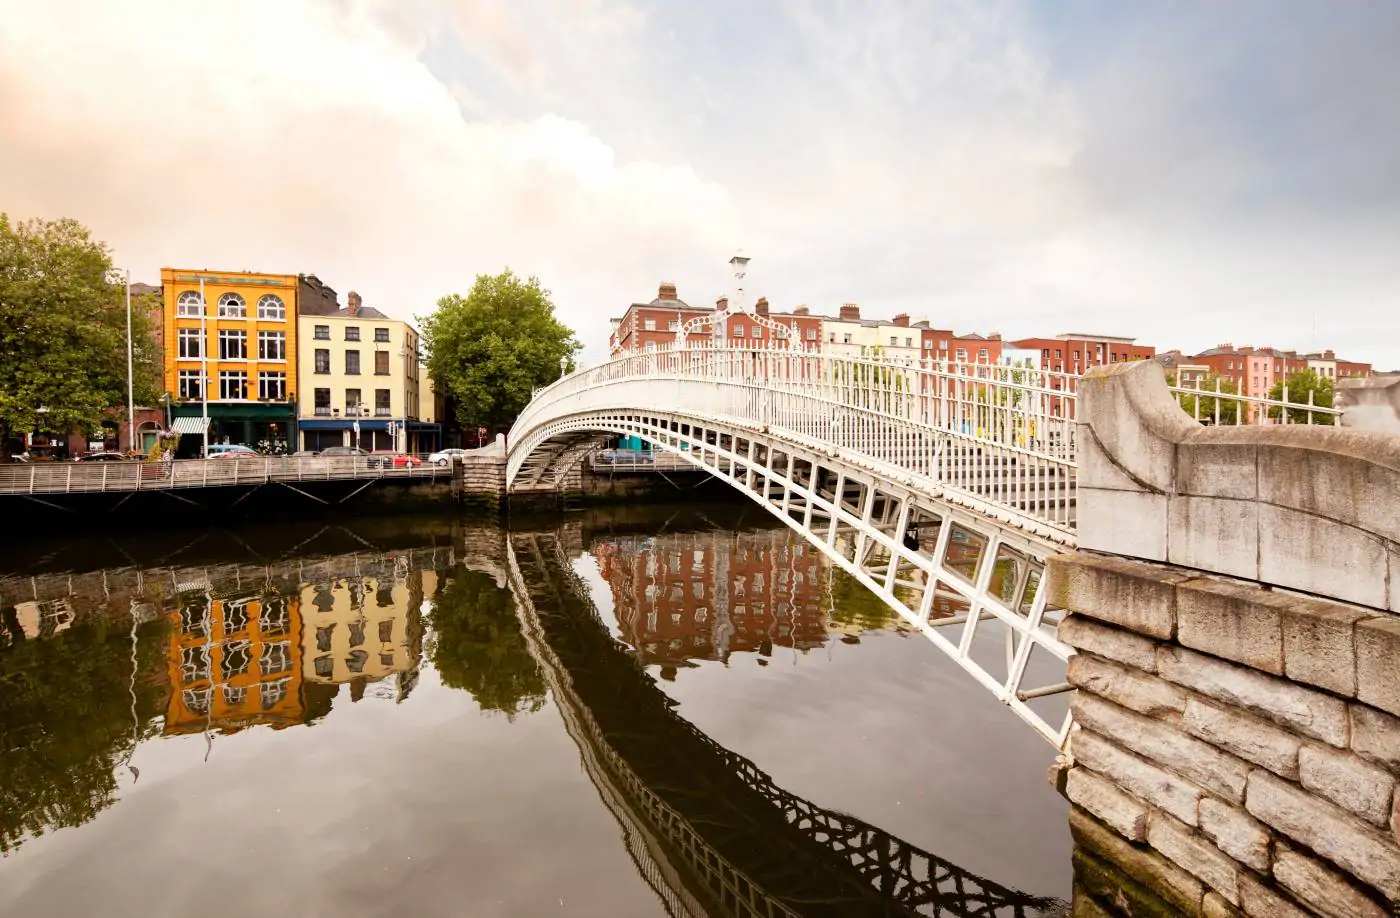 Cross the Ha'penny Bridge to the Winding Stair Bookshop as part of 7 day Ireland Itinerary